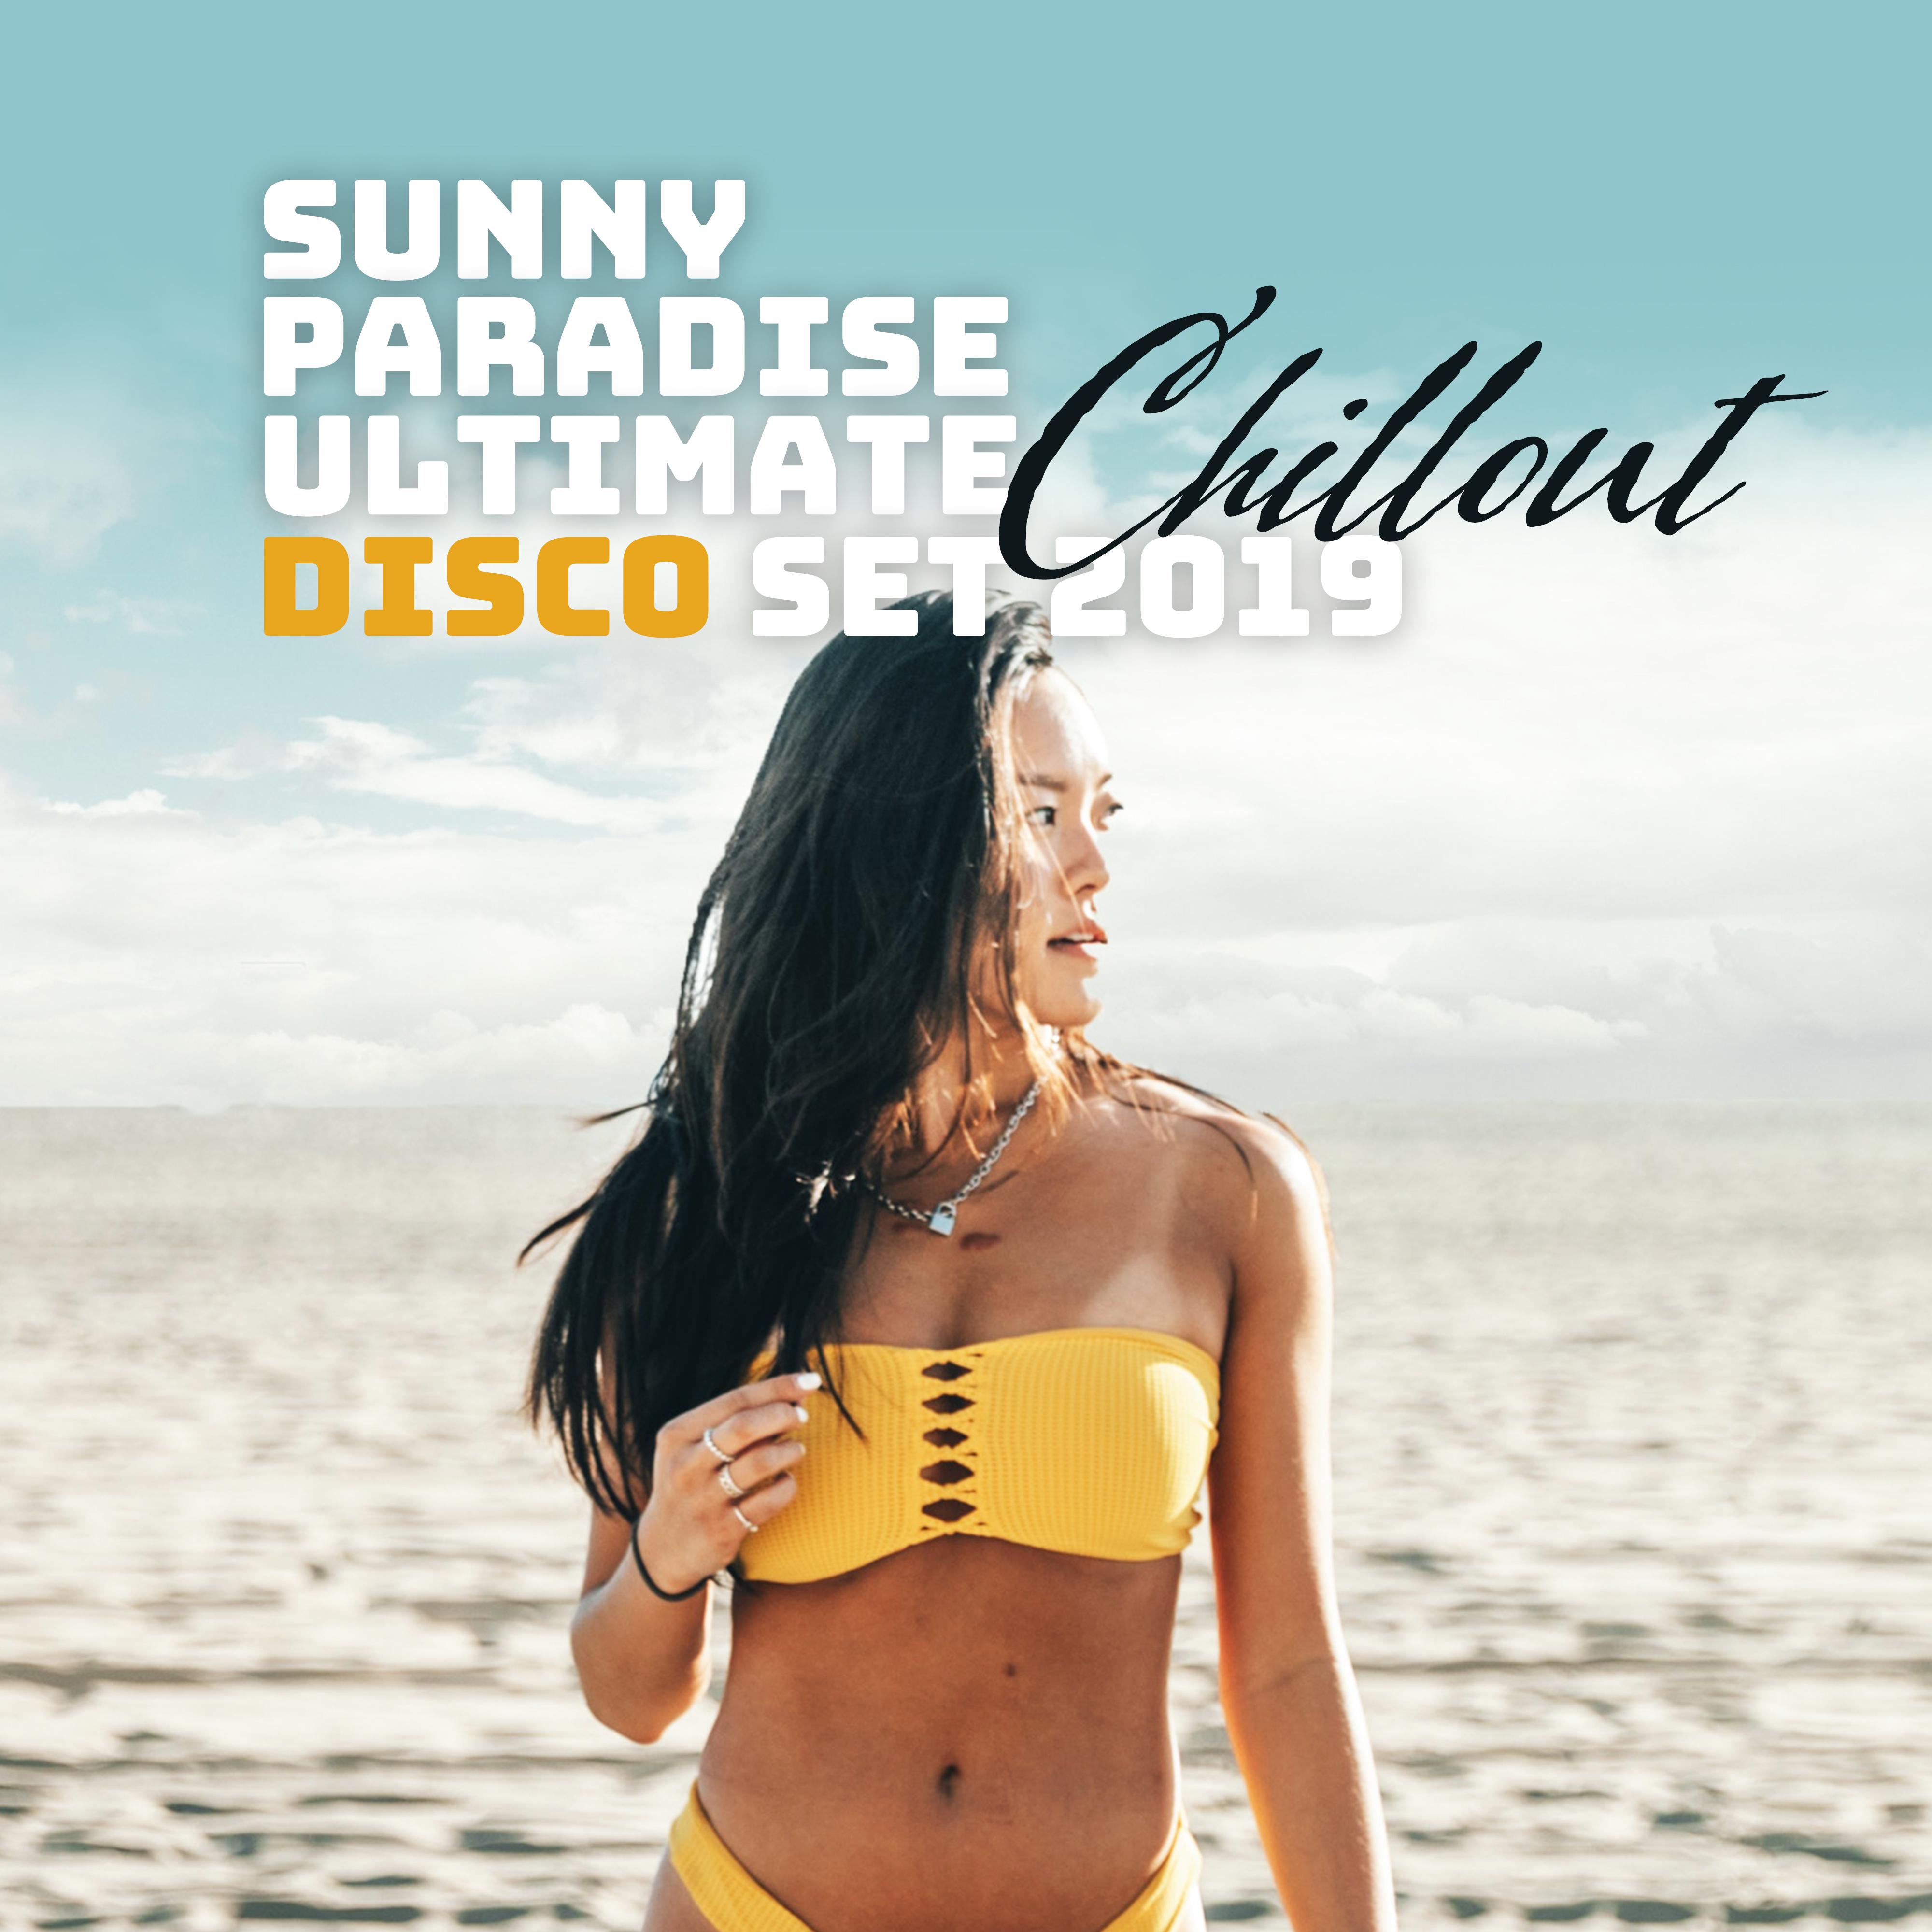 Sunny Paradise Ultimate Chillout Disco Set 2019